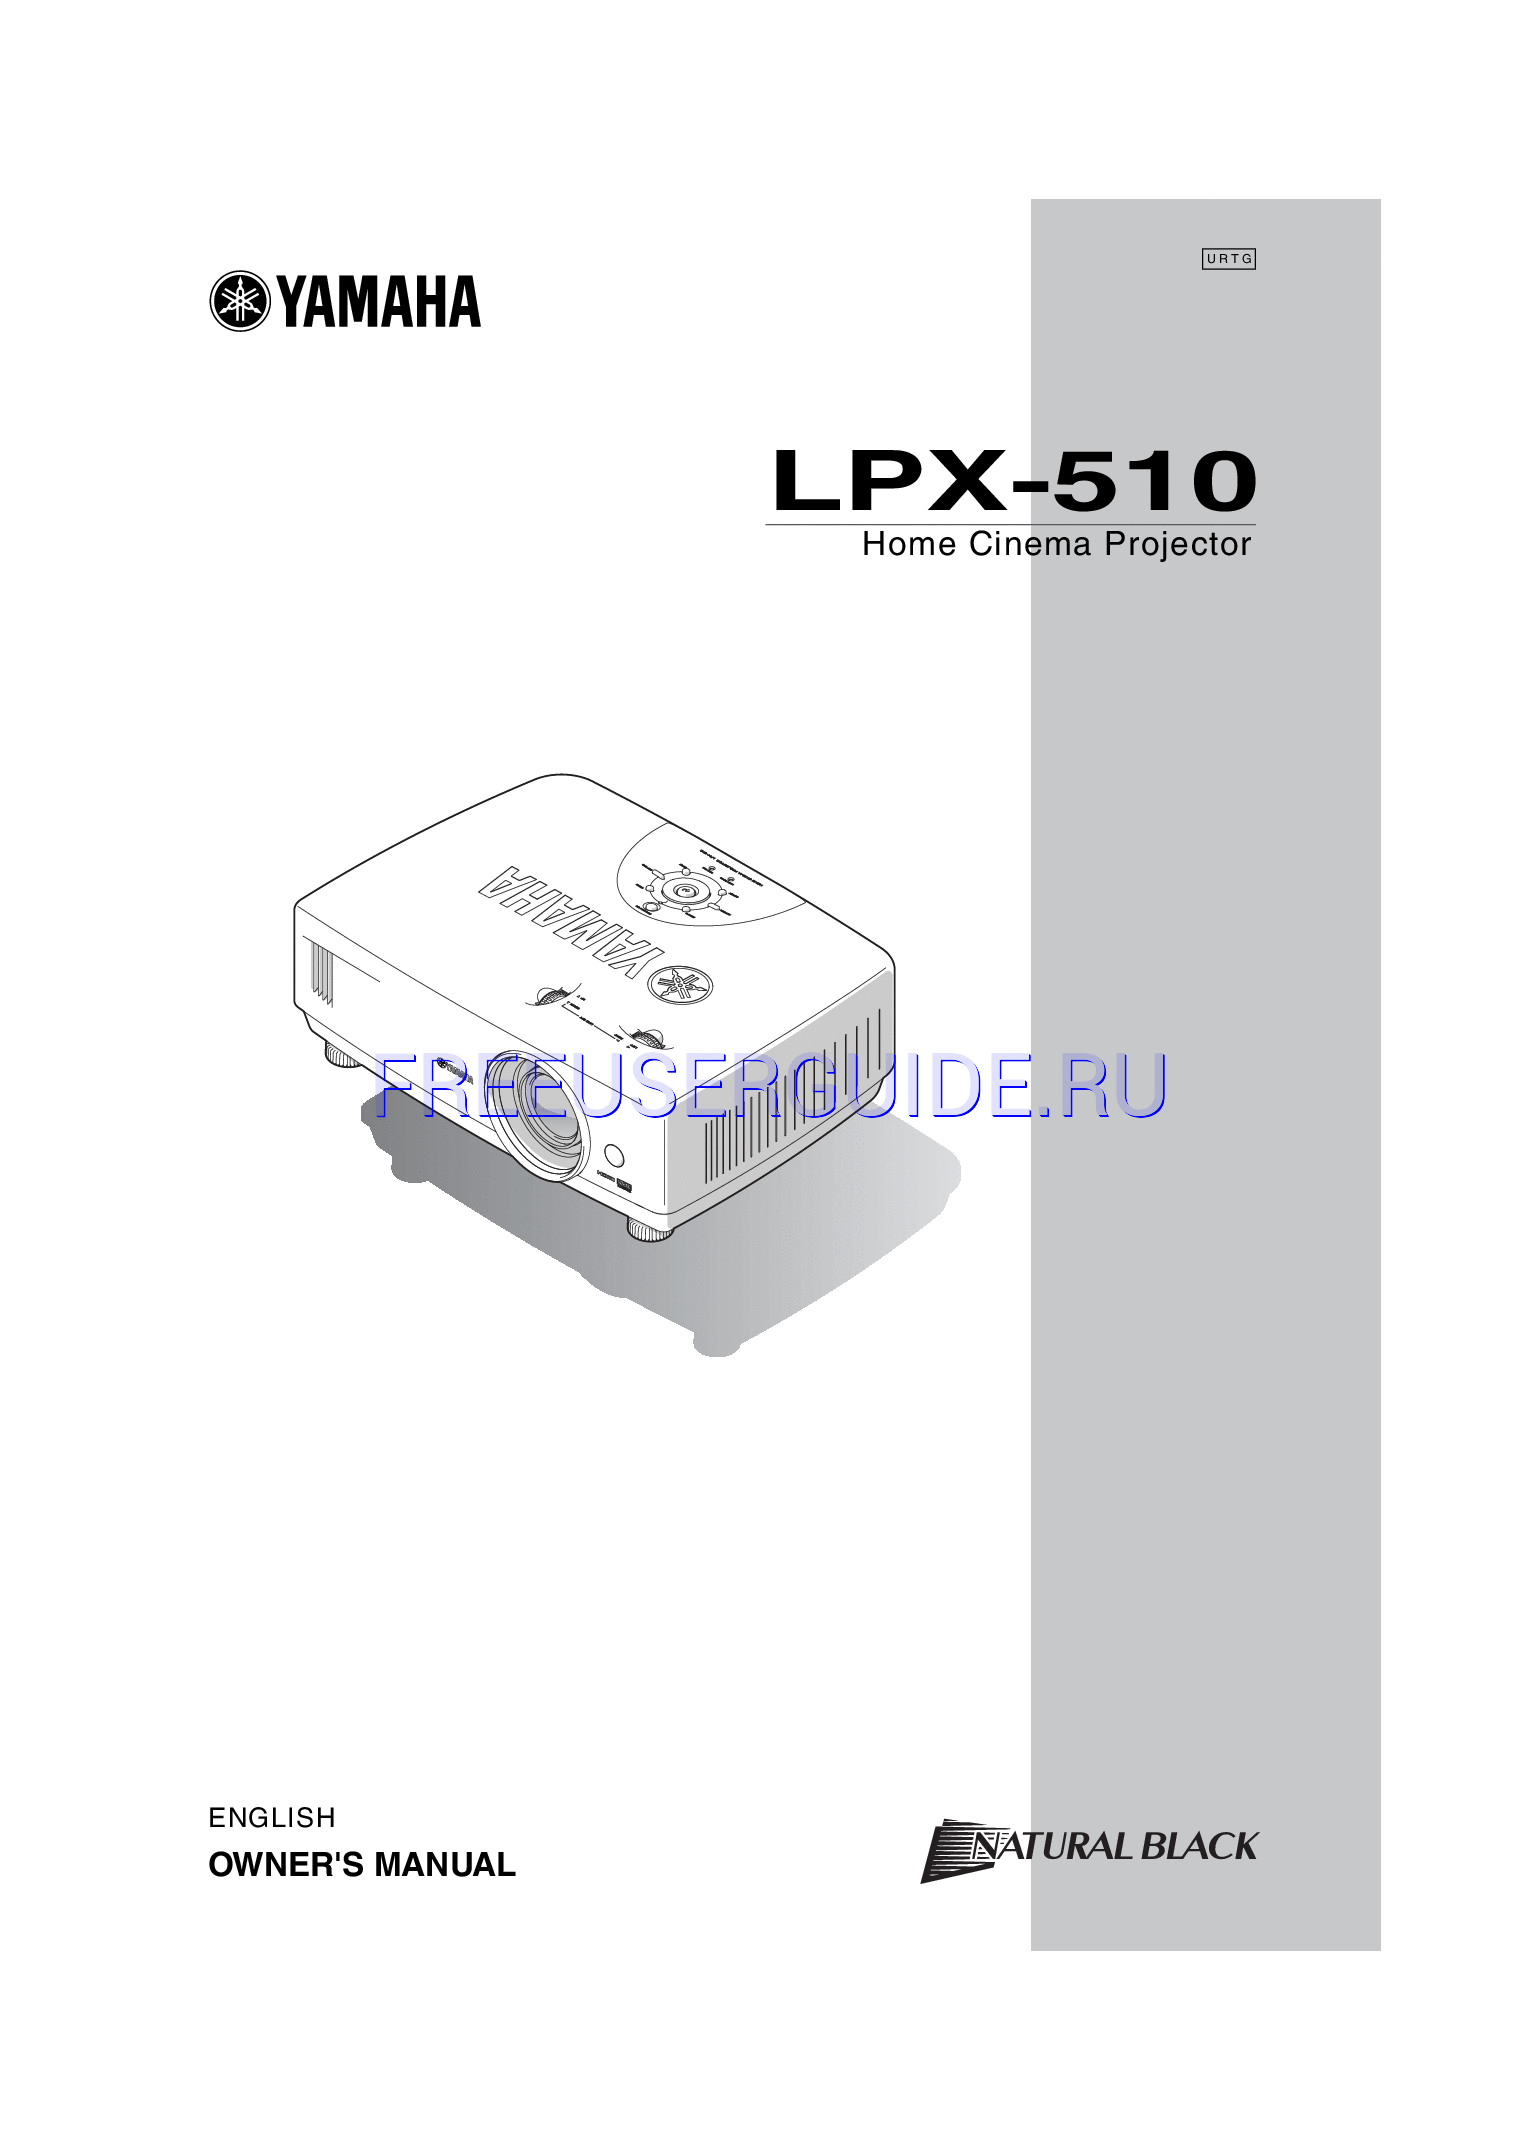 Read online Owner's Manual for Yamaha LPX-510 (Page 1)